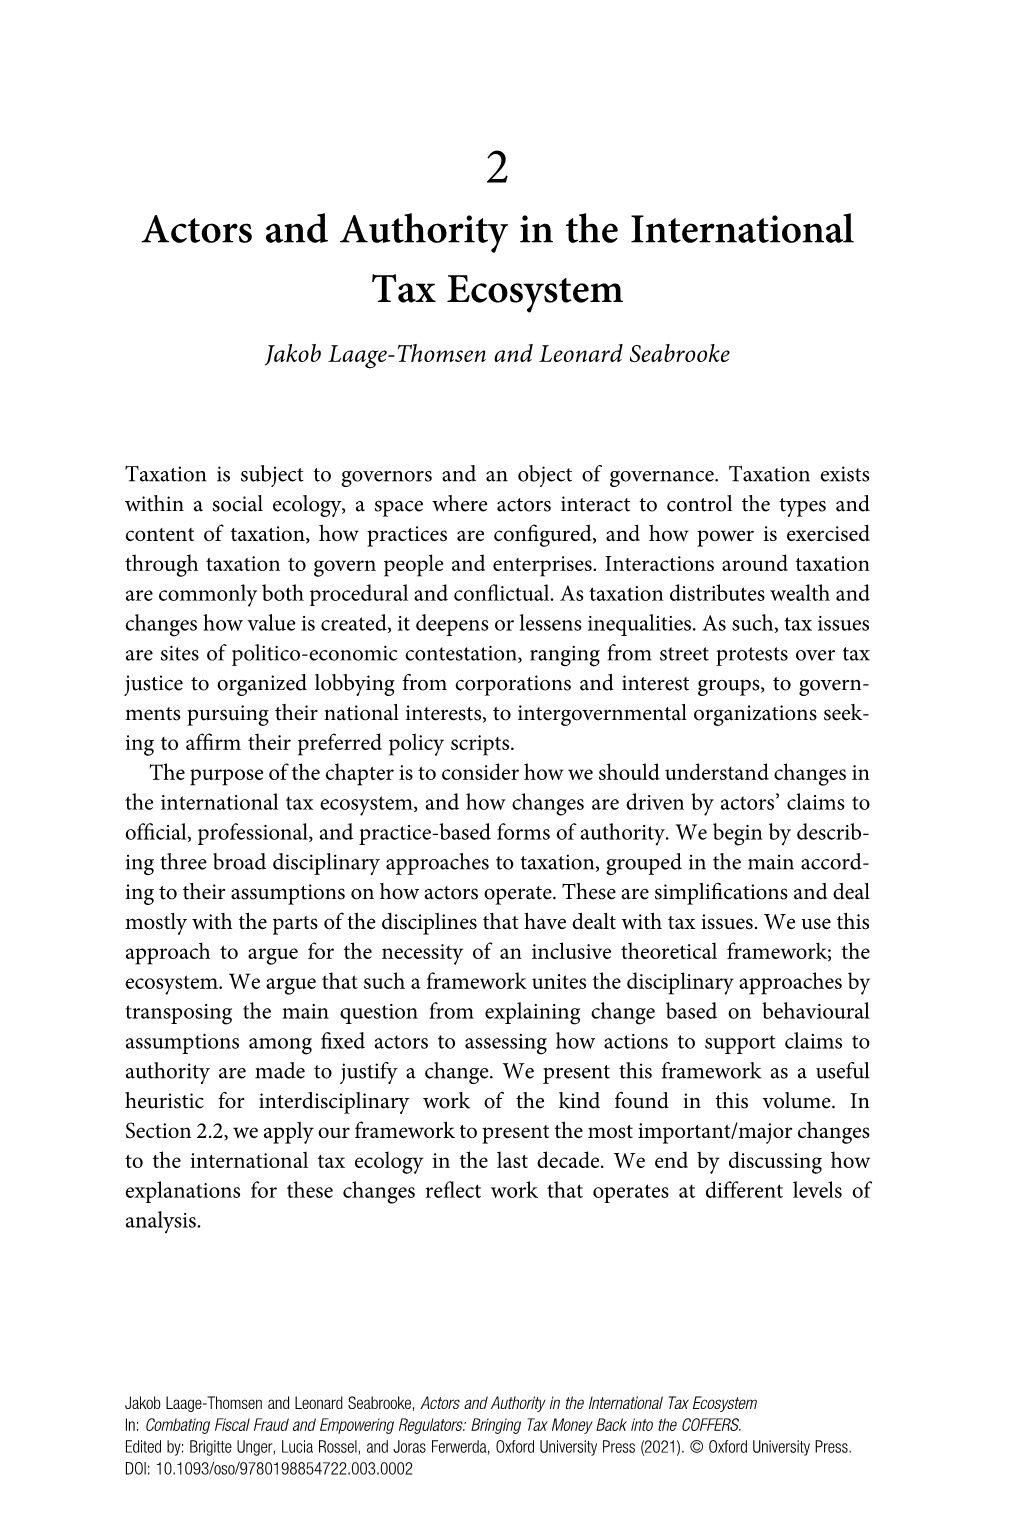 Actors and Authority in the International Tax Ecosystem